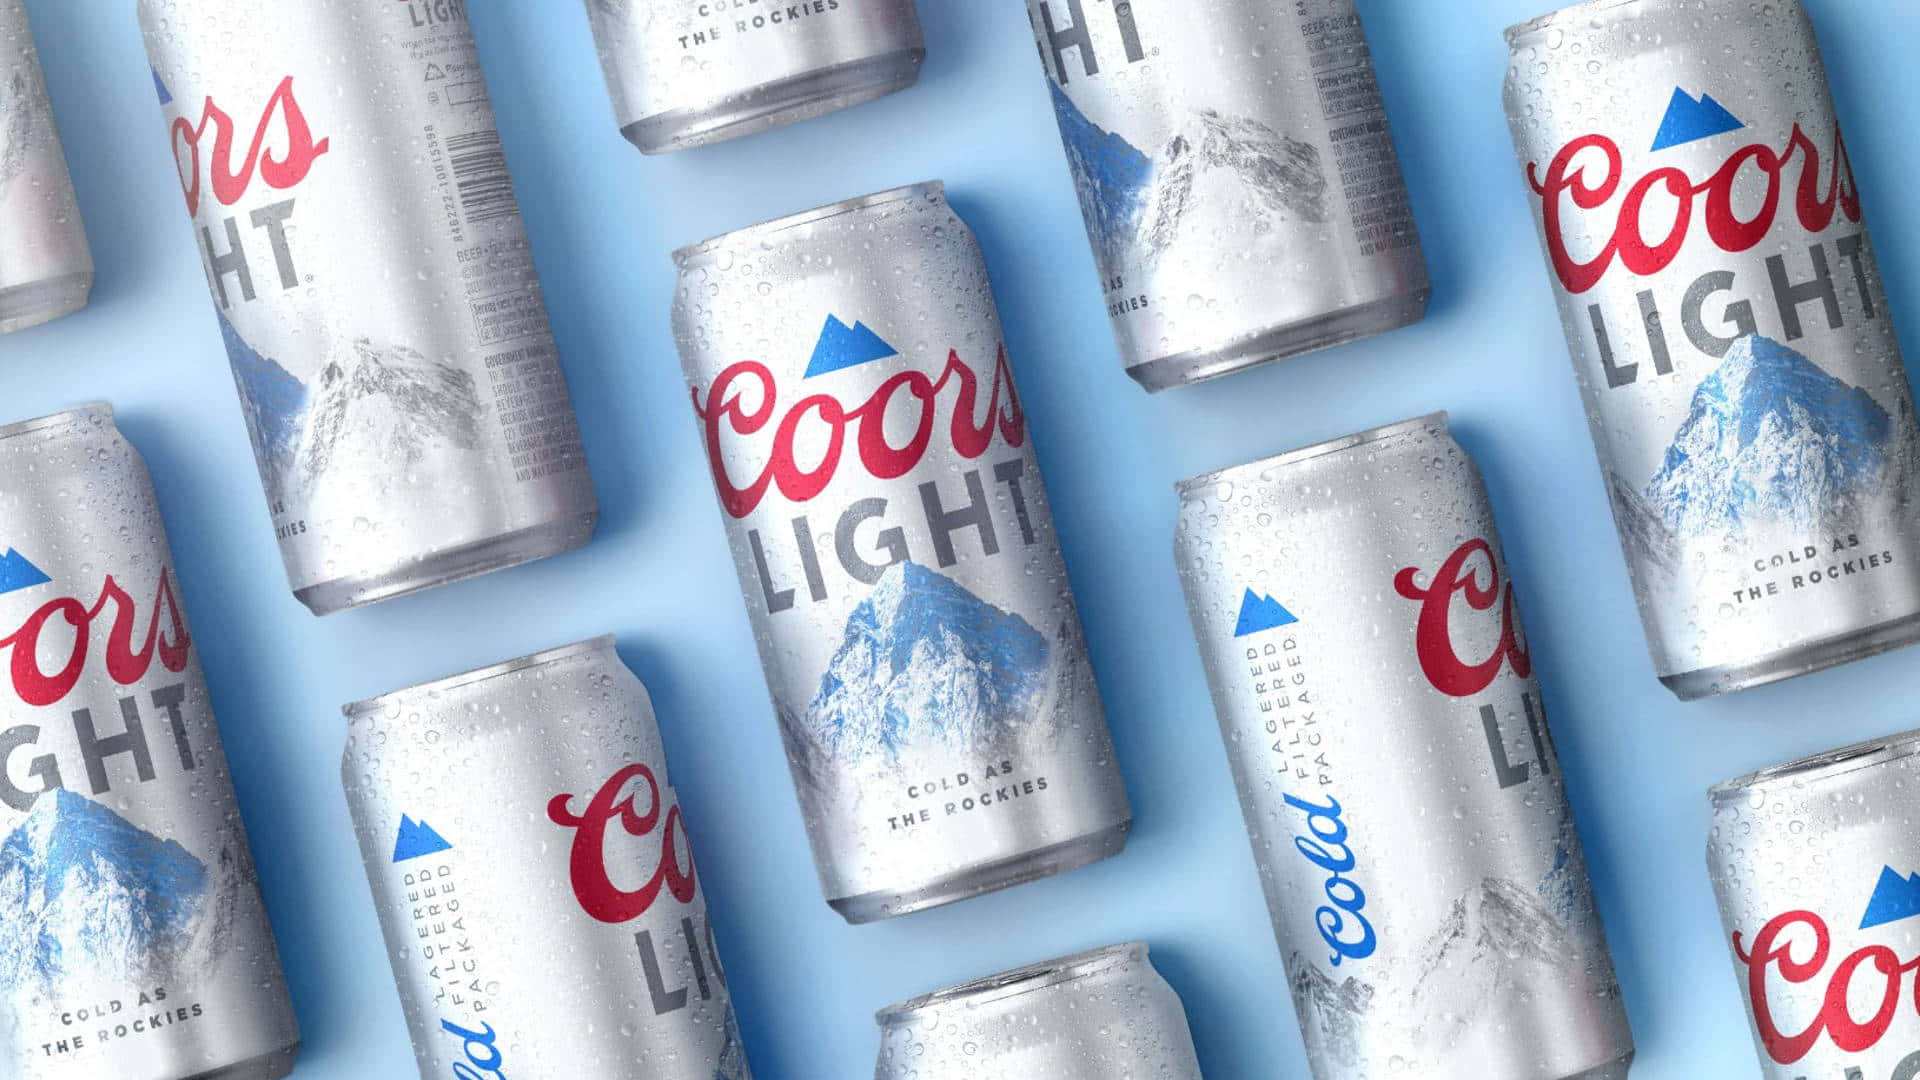 A Group Of Cans Of Coors Light Are Arranged On A Blue Surface Wallpaper